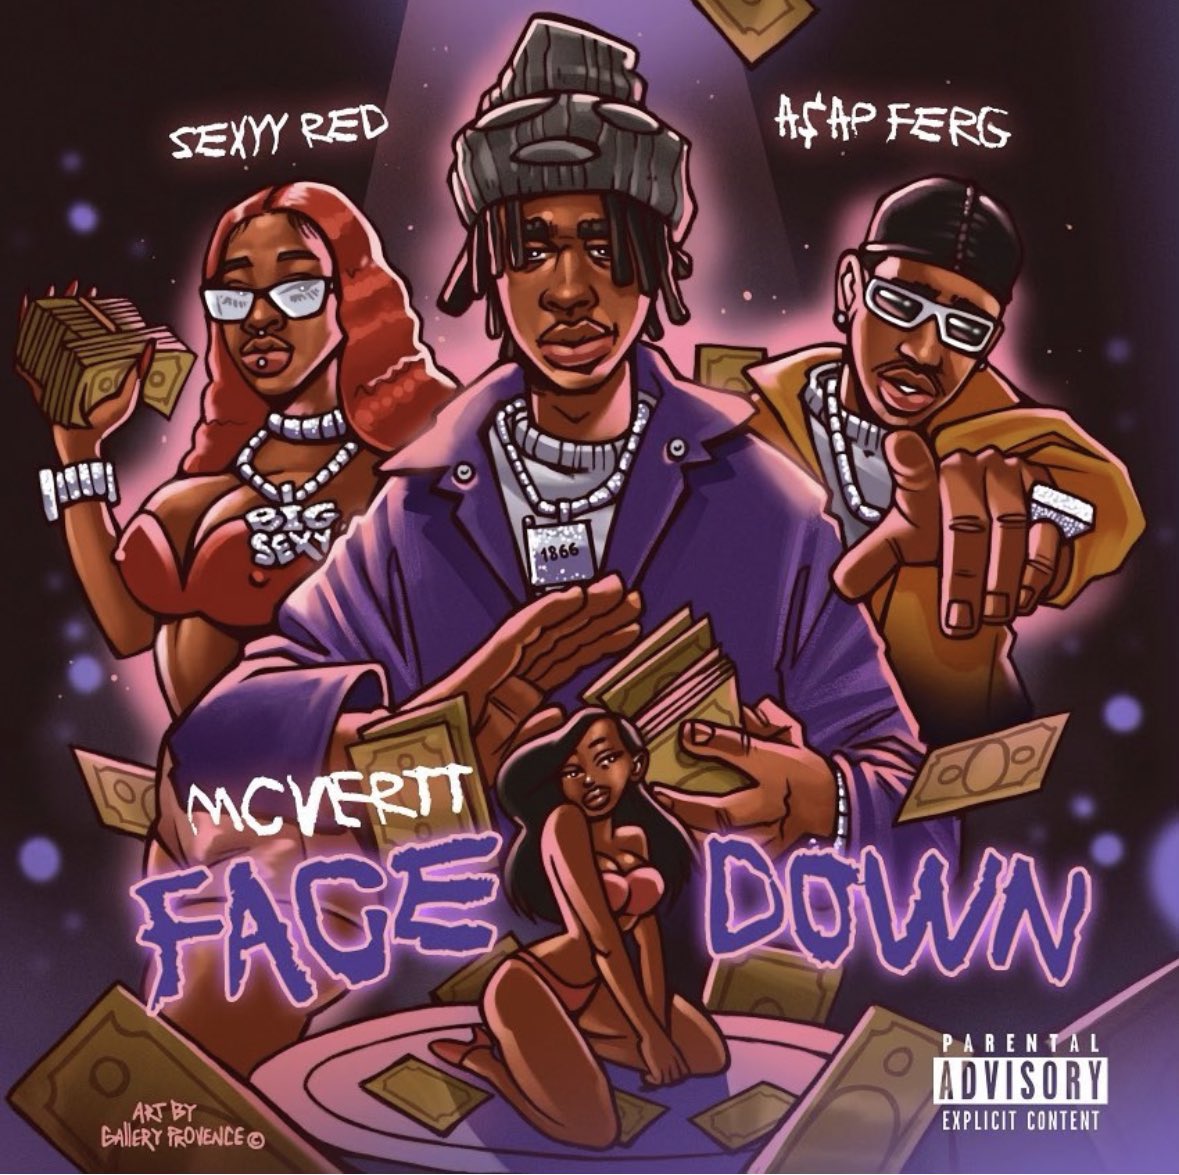 MCVERTT, Sexyy Red, A$AP Ferg releases new song ‘Face Down’.

It will be dropping Friday, July 21st.